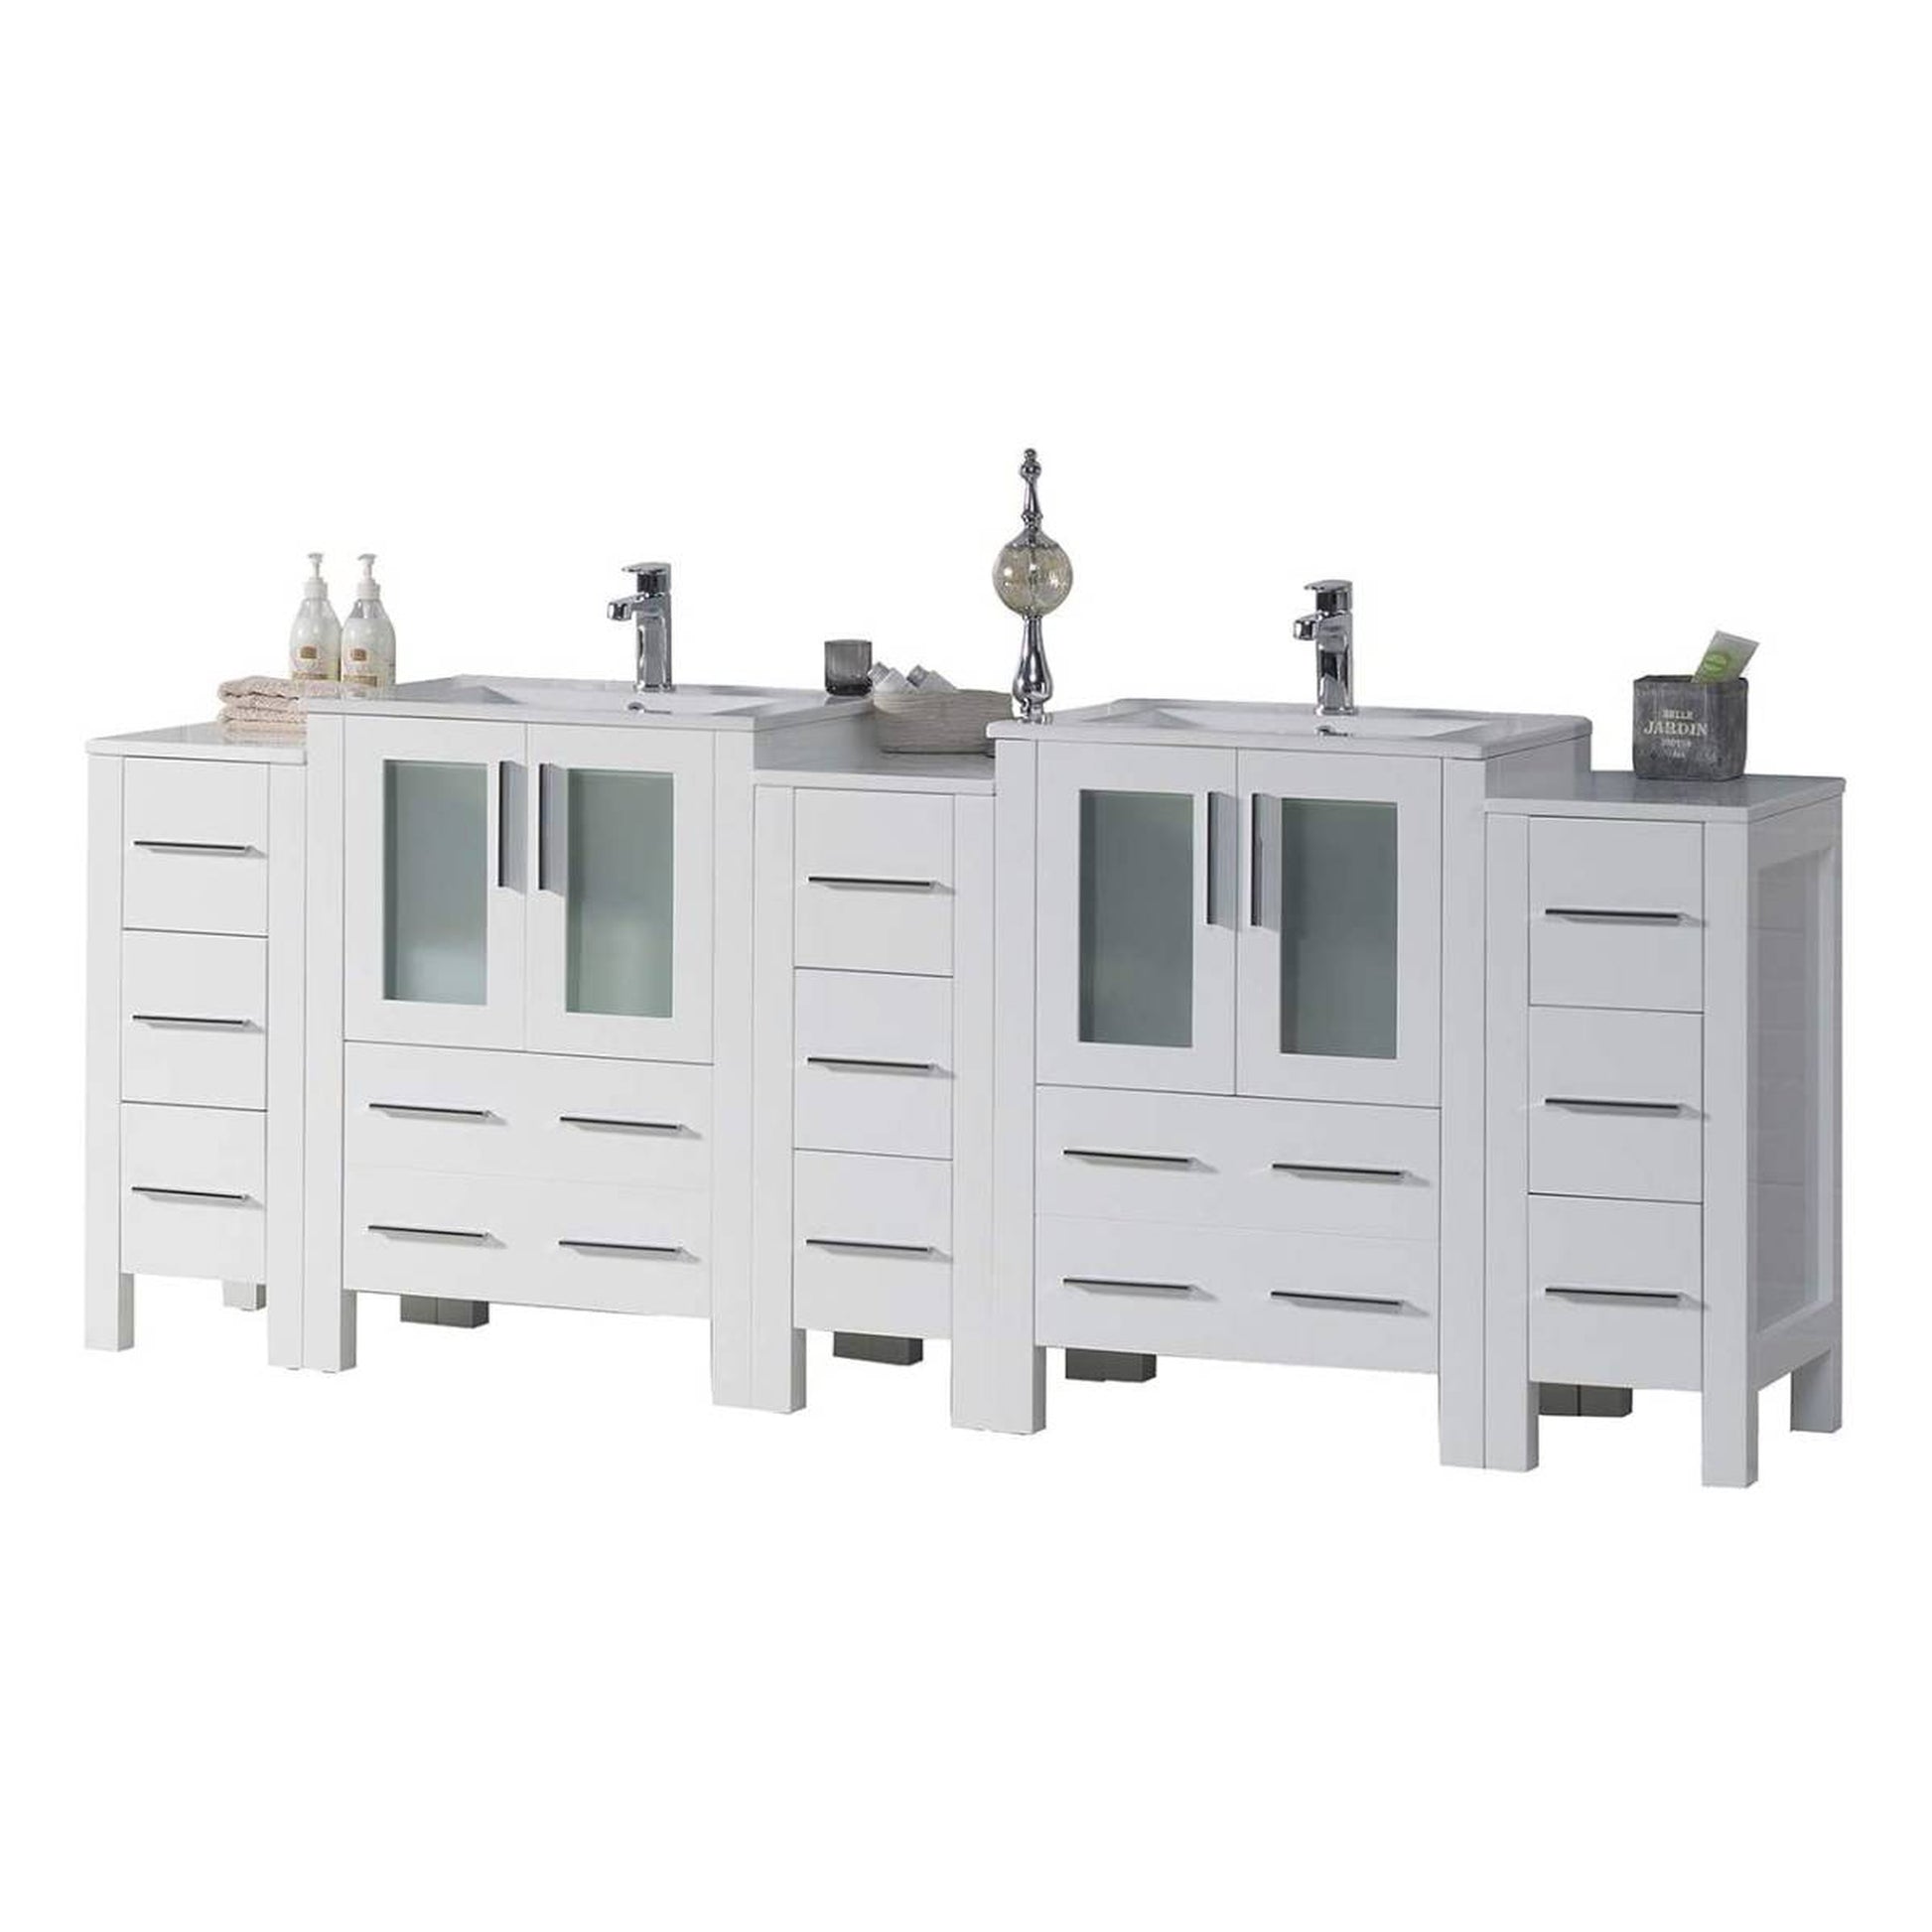 Blossom Sydney 84" White Freestanding Vanity With Integrated Double Sinks Ceramic Top and Three Side Cabinet